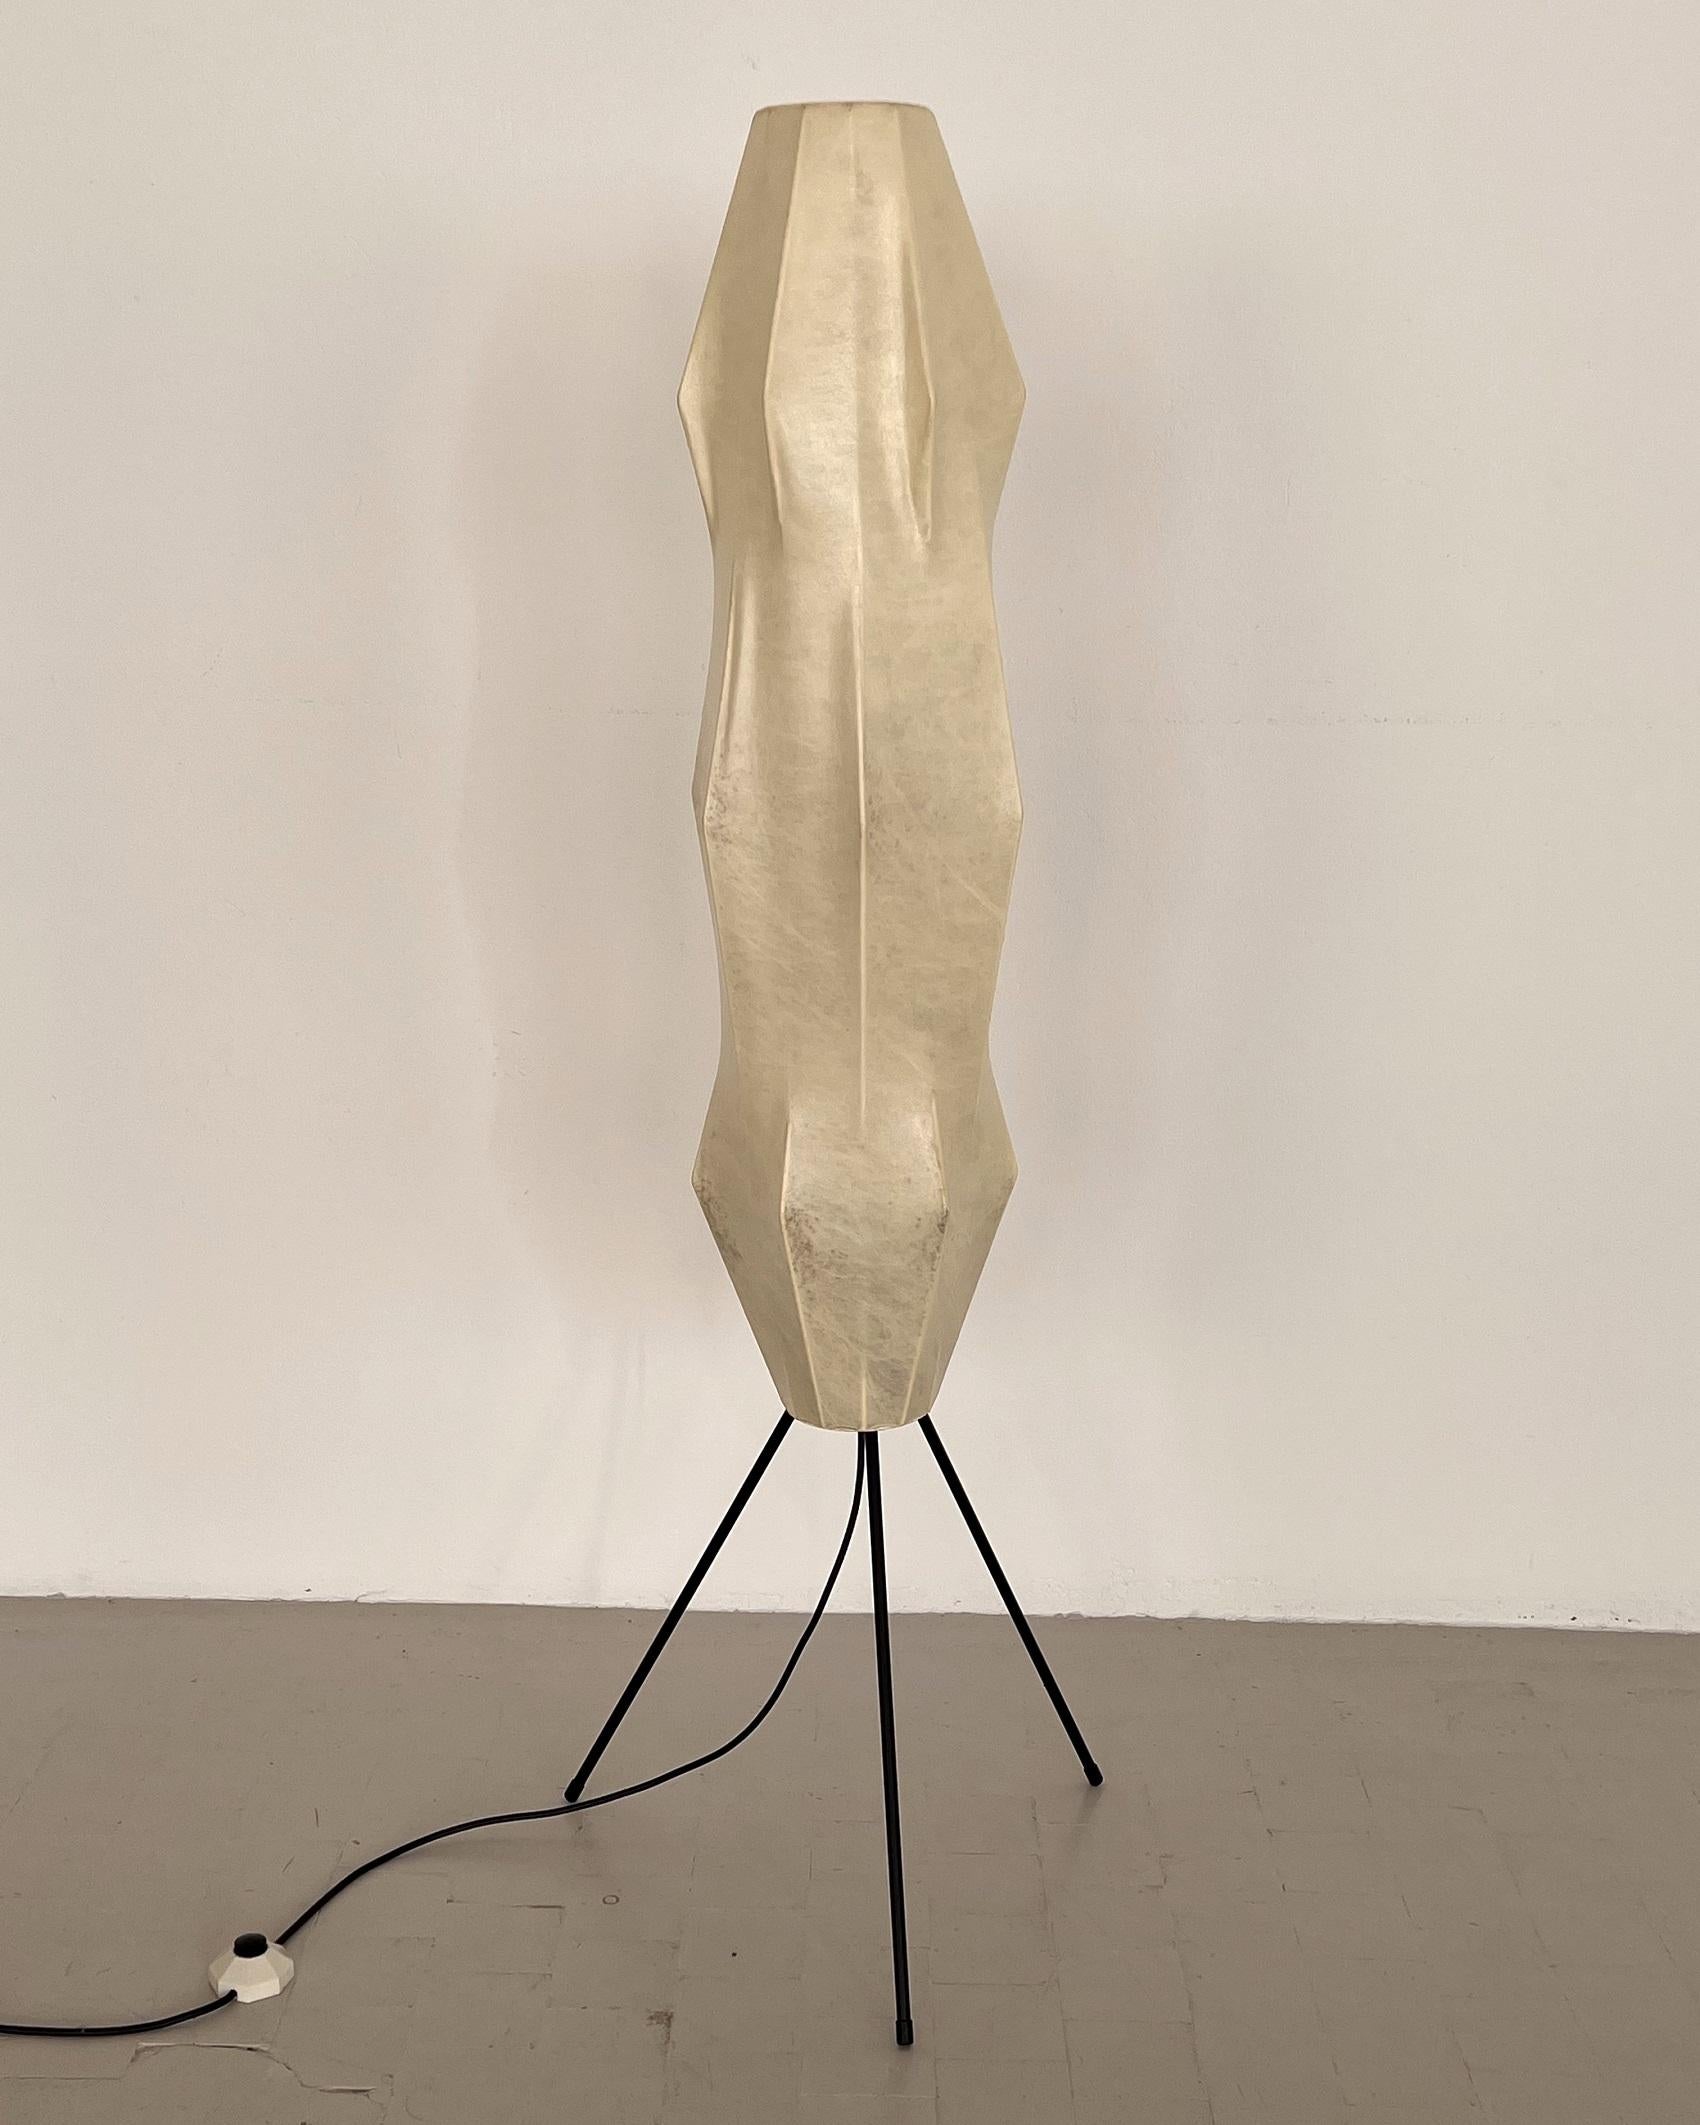 Midcentury Cocoon Floor Lamp with Metal Base by Goldkant, 1960s For Sale 2